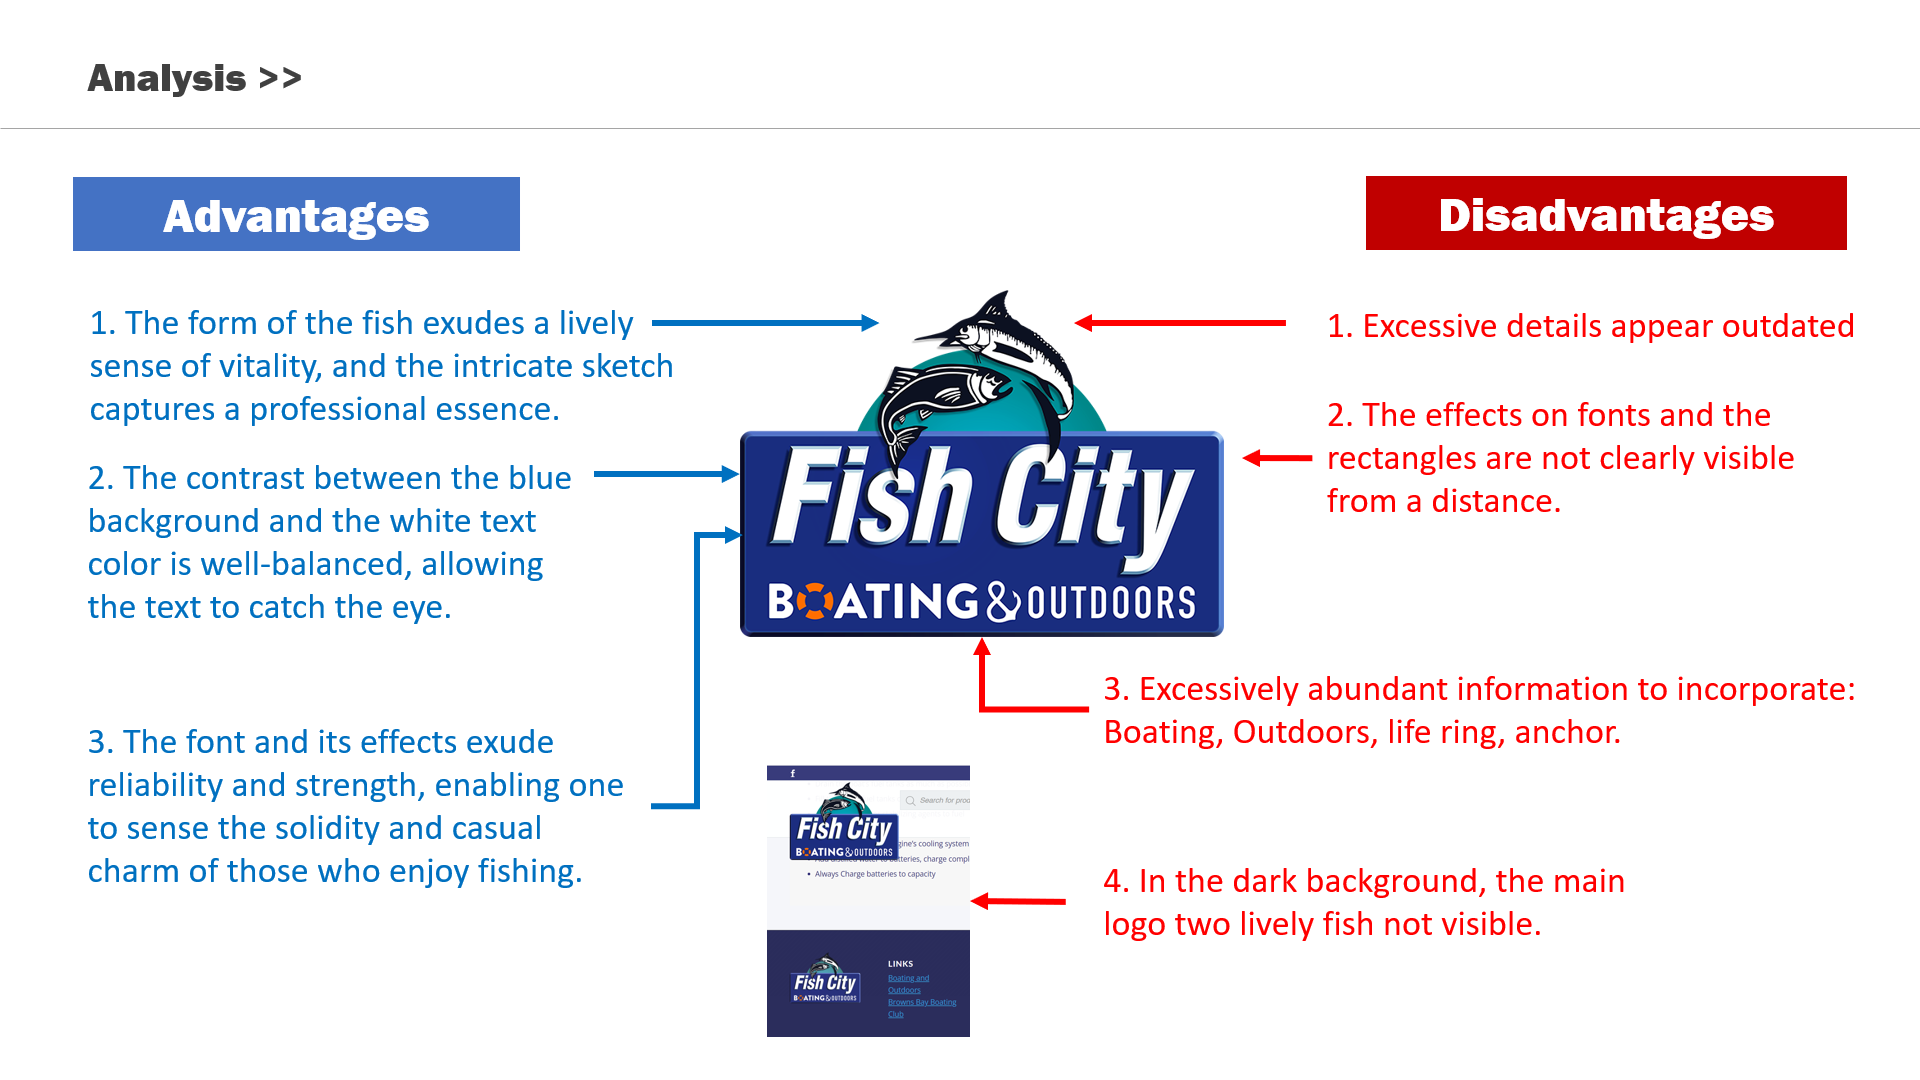 Analysis of the current fishcity logo